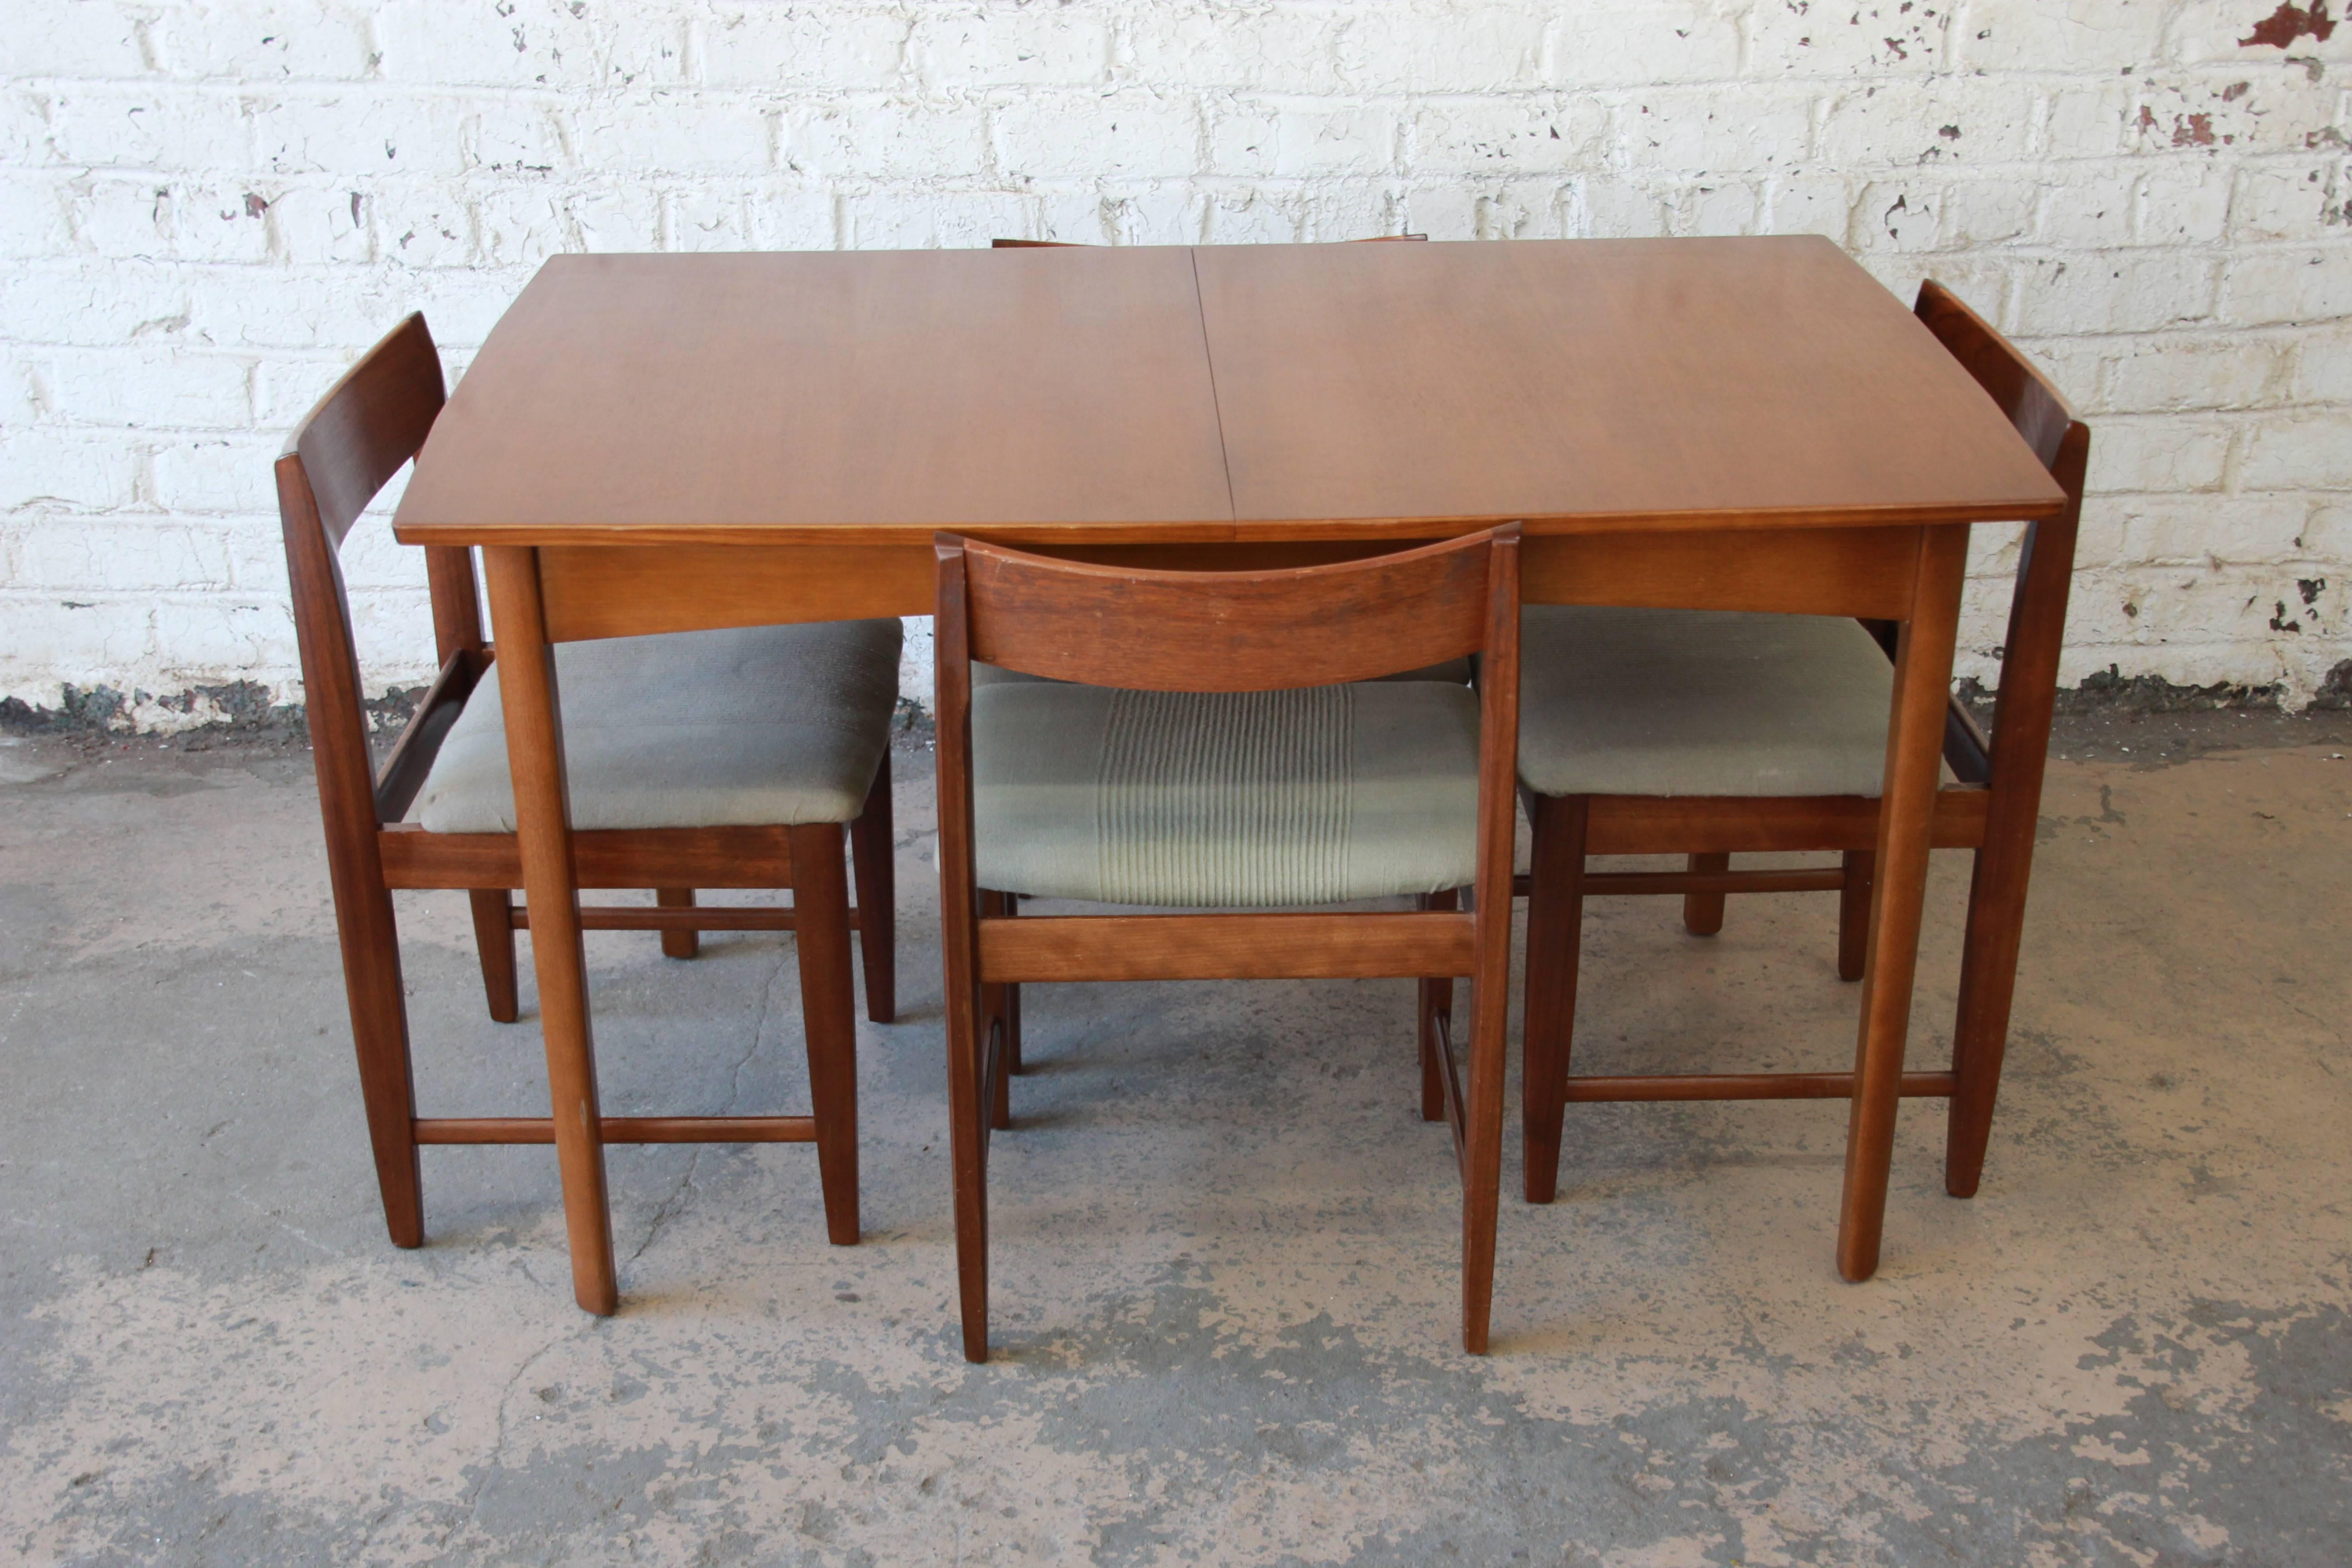 A very nice Mid-Century Modern Danish style teak dining set by G-Plan. The set includes the dining table with a built-in flip-up leaf and four chairs. It features gorgeous teak wood grain and sleek Mid-Century Modern design. The table and chairs are